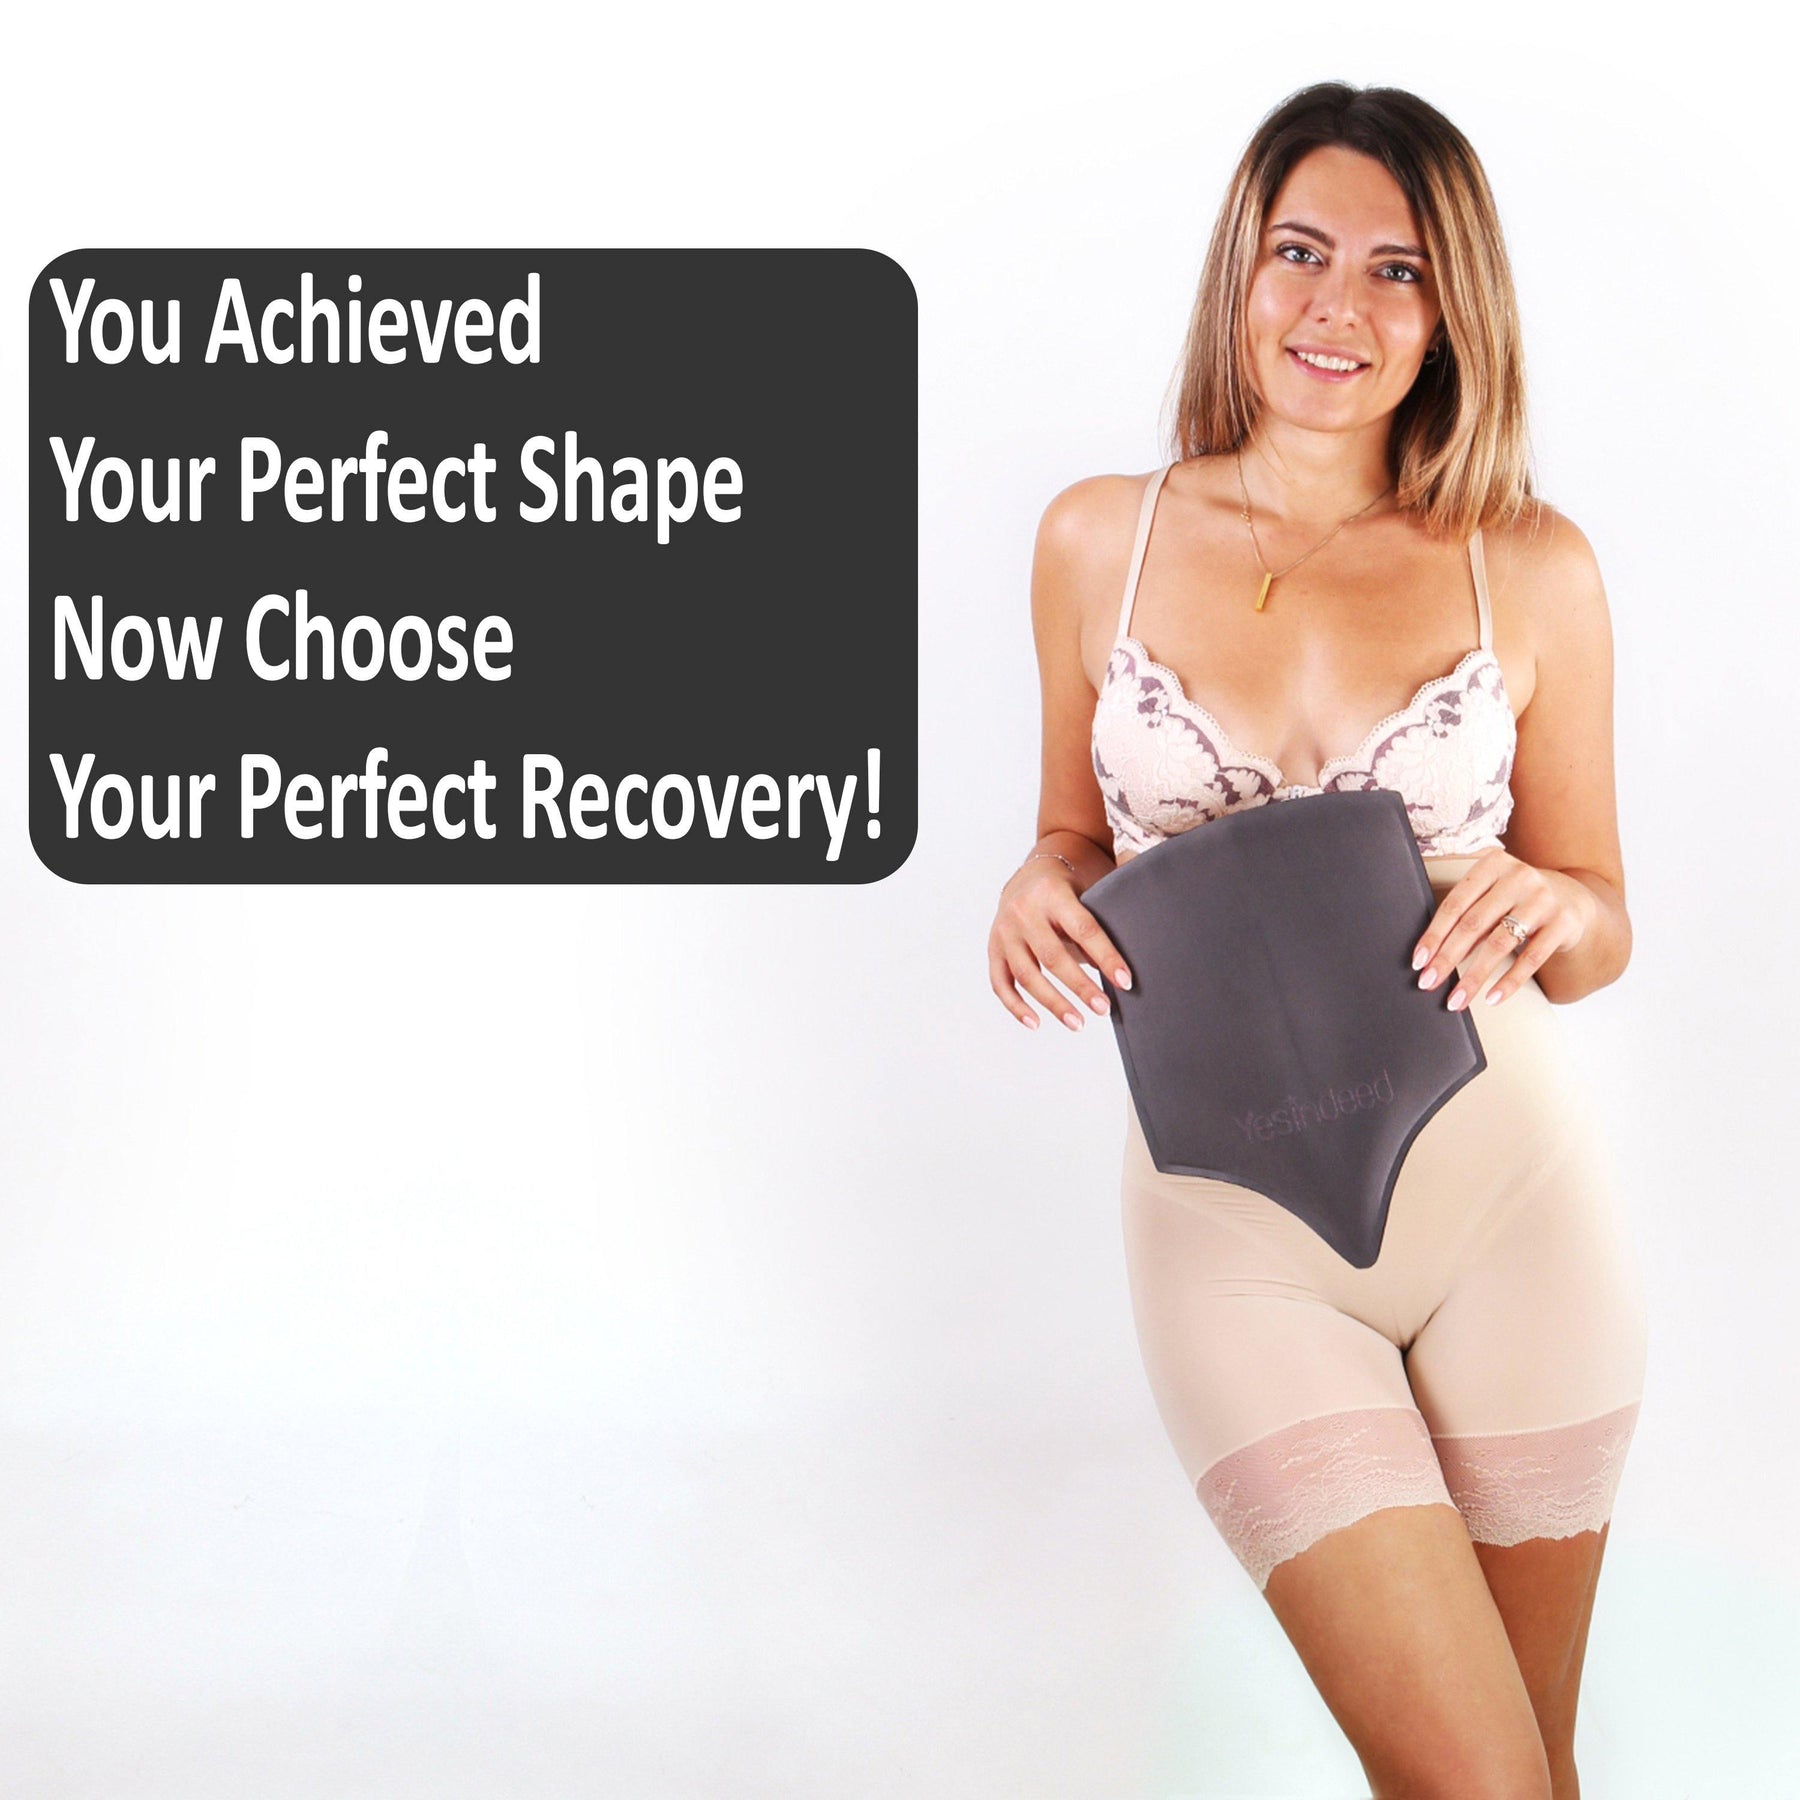 Top 5 Lipo Foams to Help You Recover from Liposuction